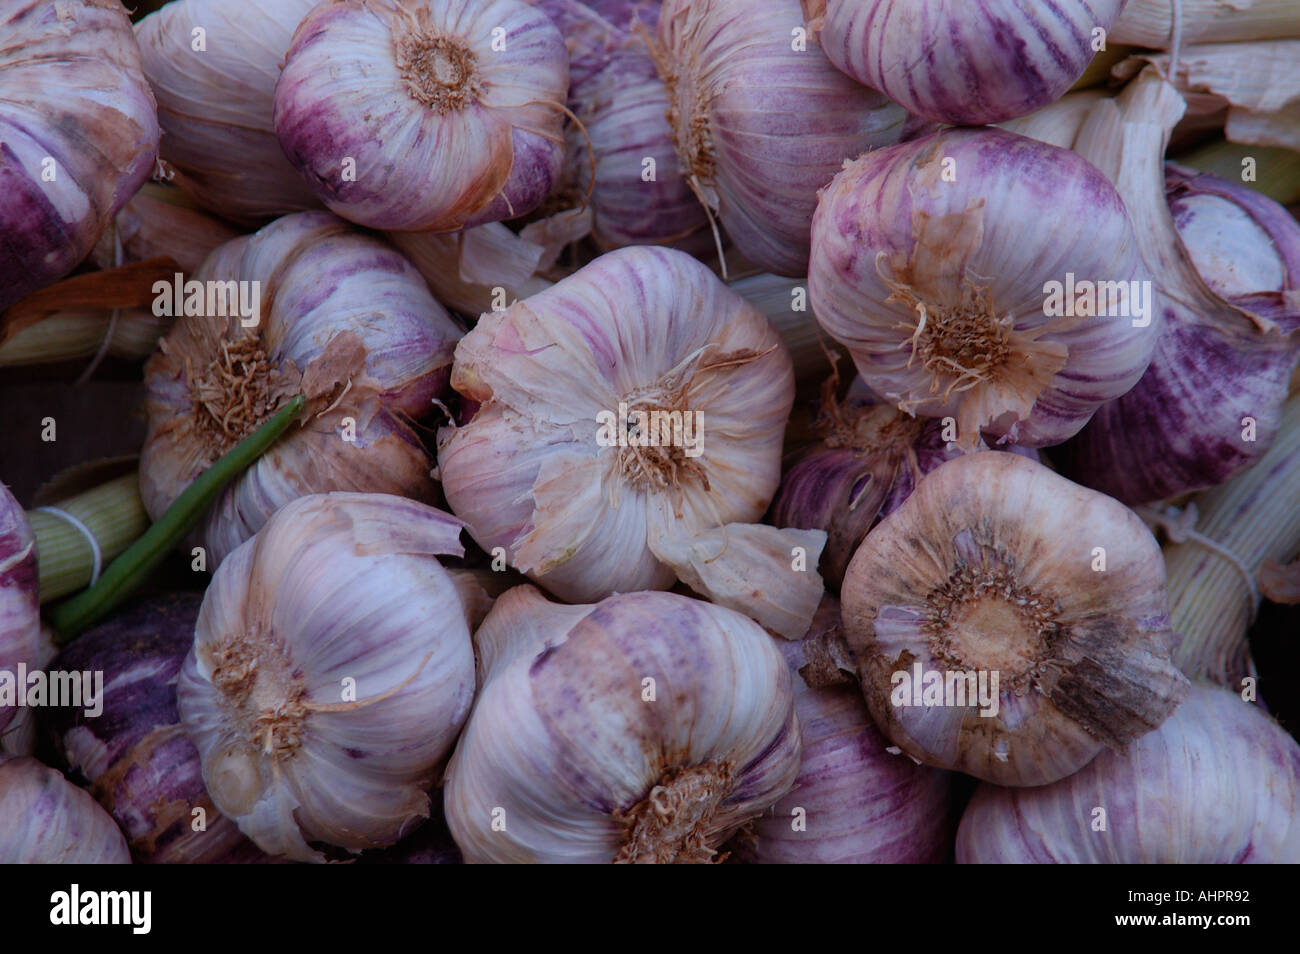 A display of garlic at a local market in the Gers region of France Stock Photo